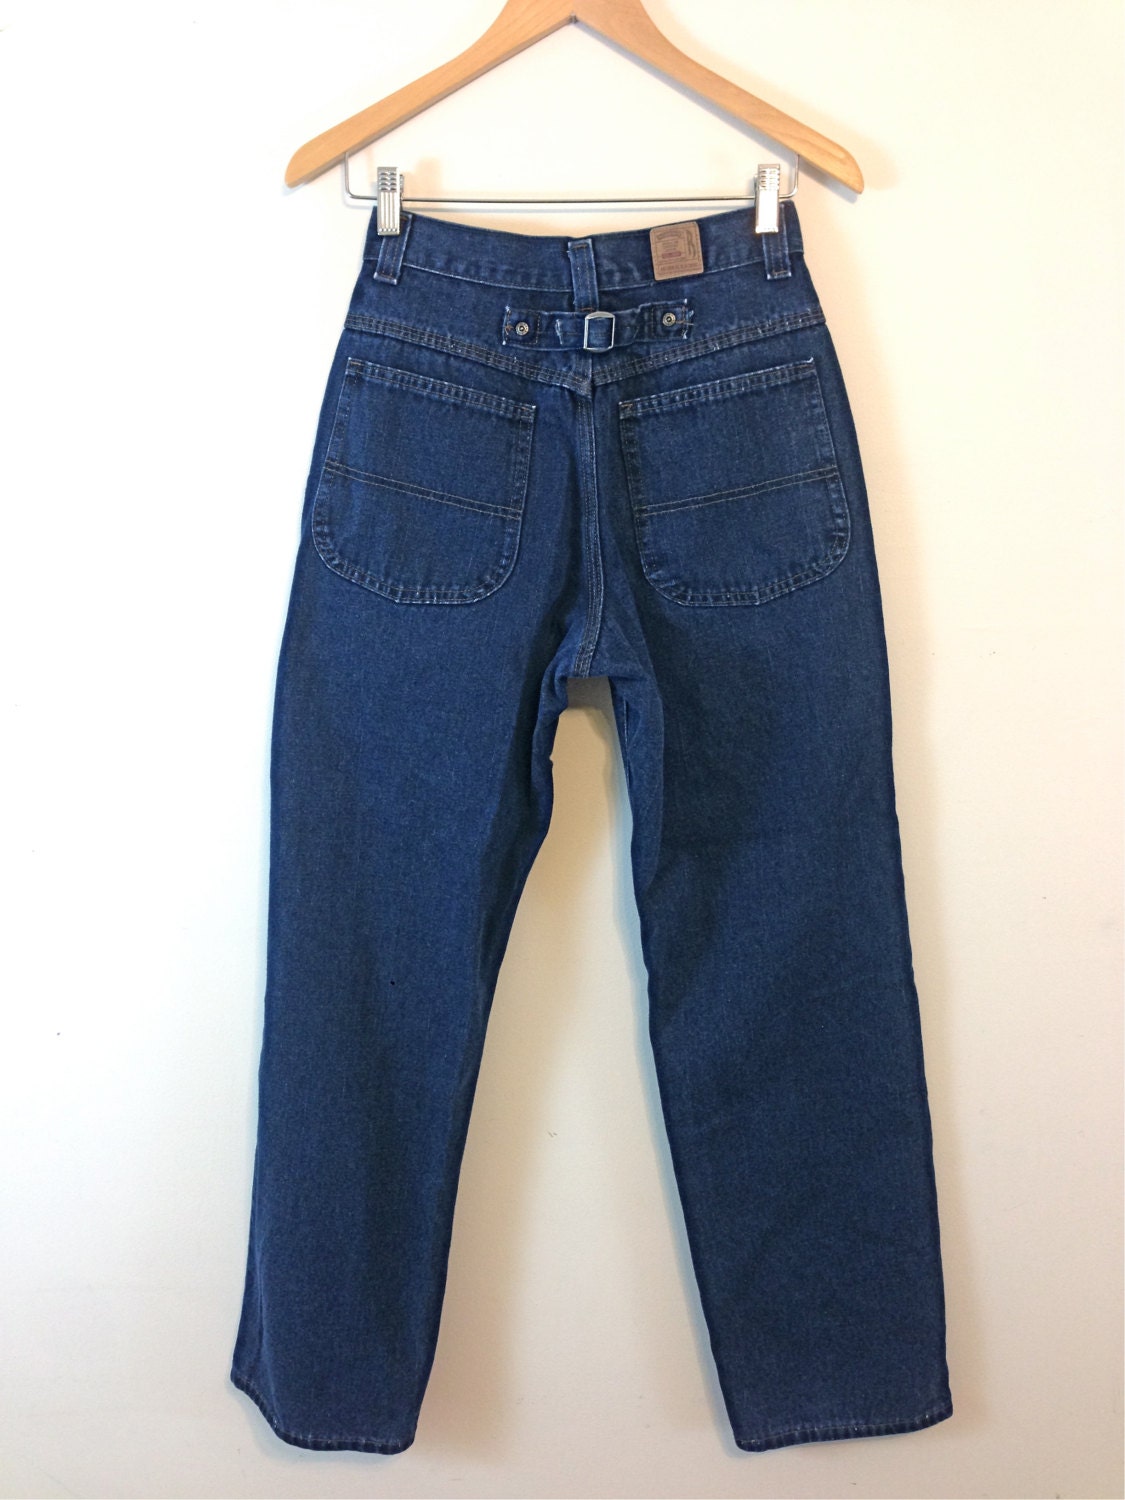 Vintage 90s Riders Mom Jeans High Waisted baggy 90s jeans High Rise Dark  Blue Wash Denim Pants Buckle Back Wide Leg Blue Jeans Size 27